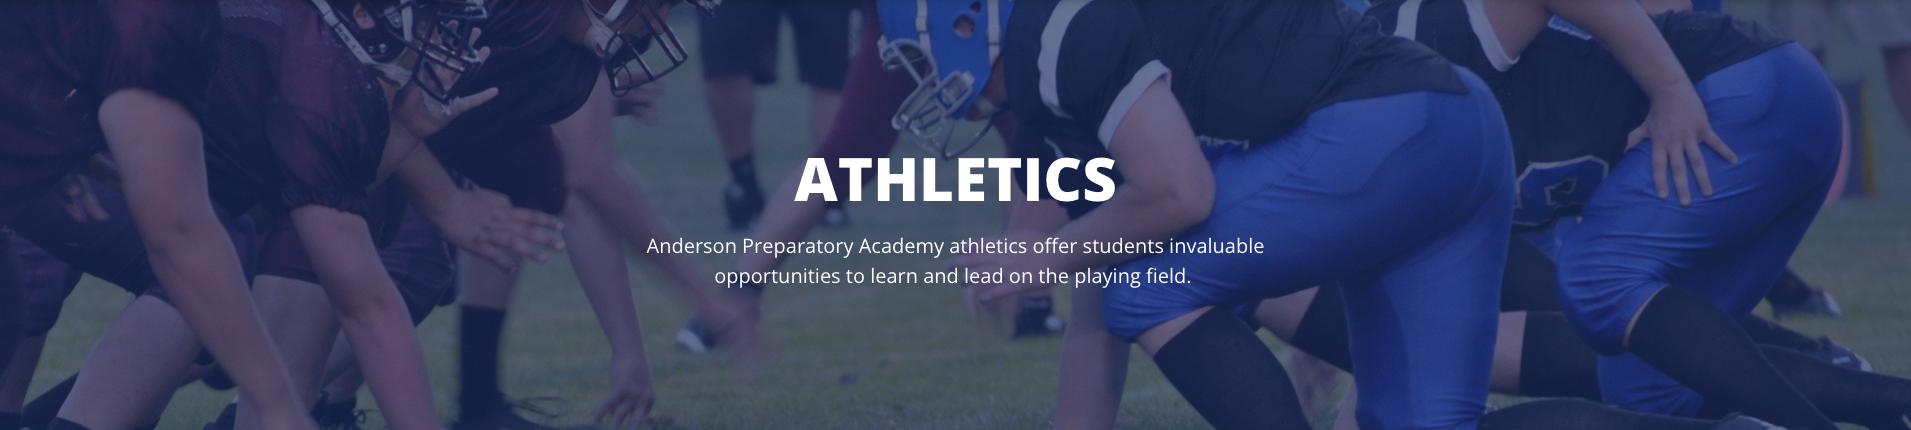 athletics: Anderson Preparatory Academy athletics offer students invaluable  ﻿opportunities to learn and lead on the playing field